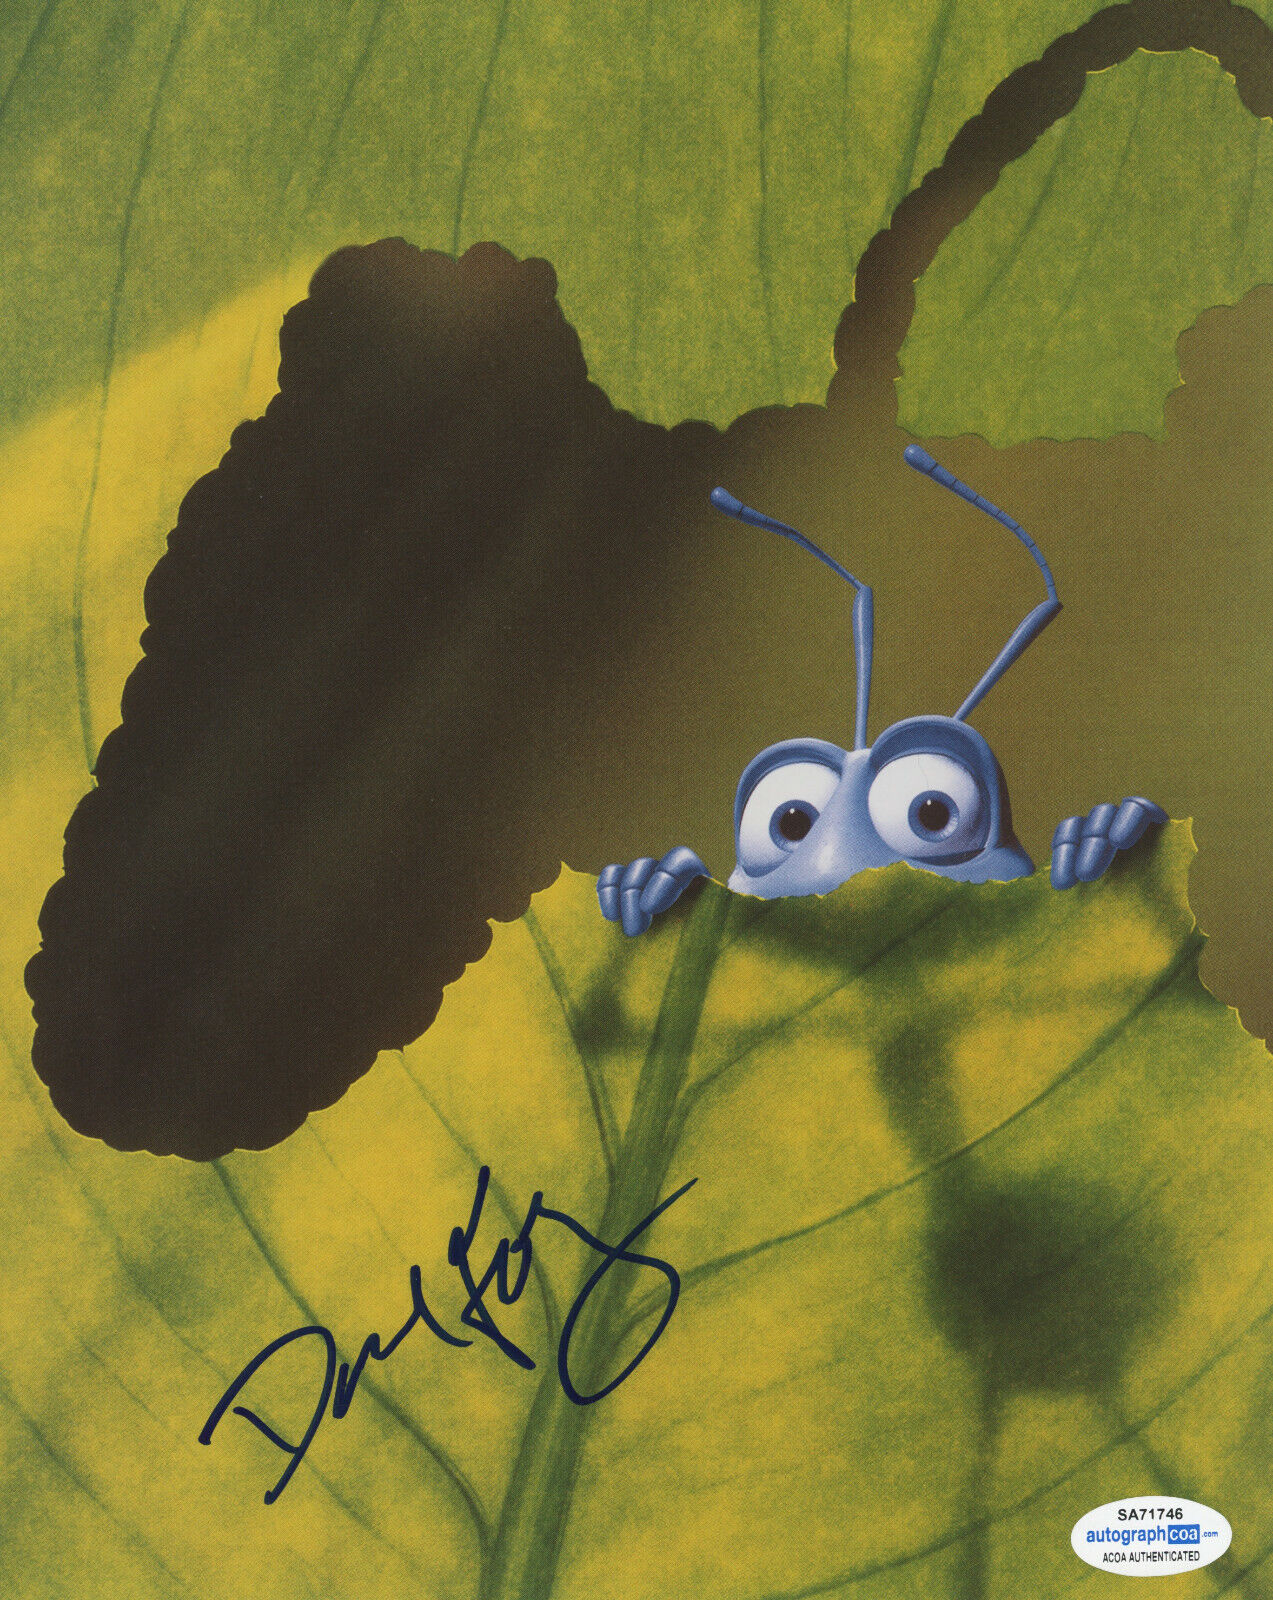 ACTOR DAVE FOLEY SIGNED A BUG'S LIFE FLIK 8x10 Photo Poster painting! KIDS IN THE HALL ACOA COA